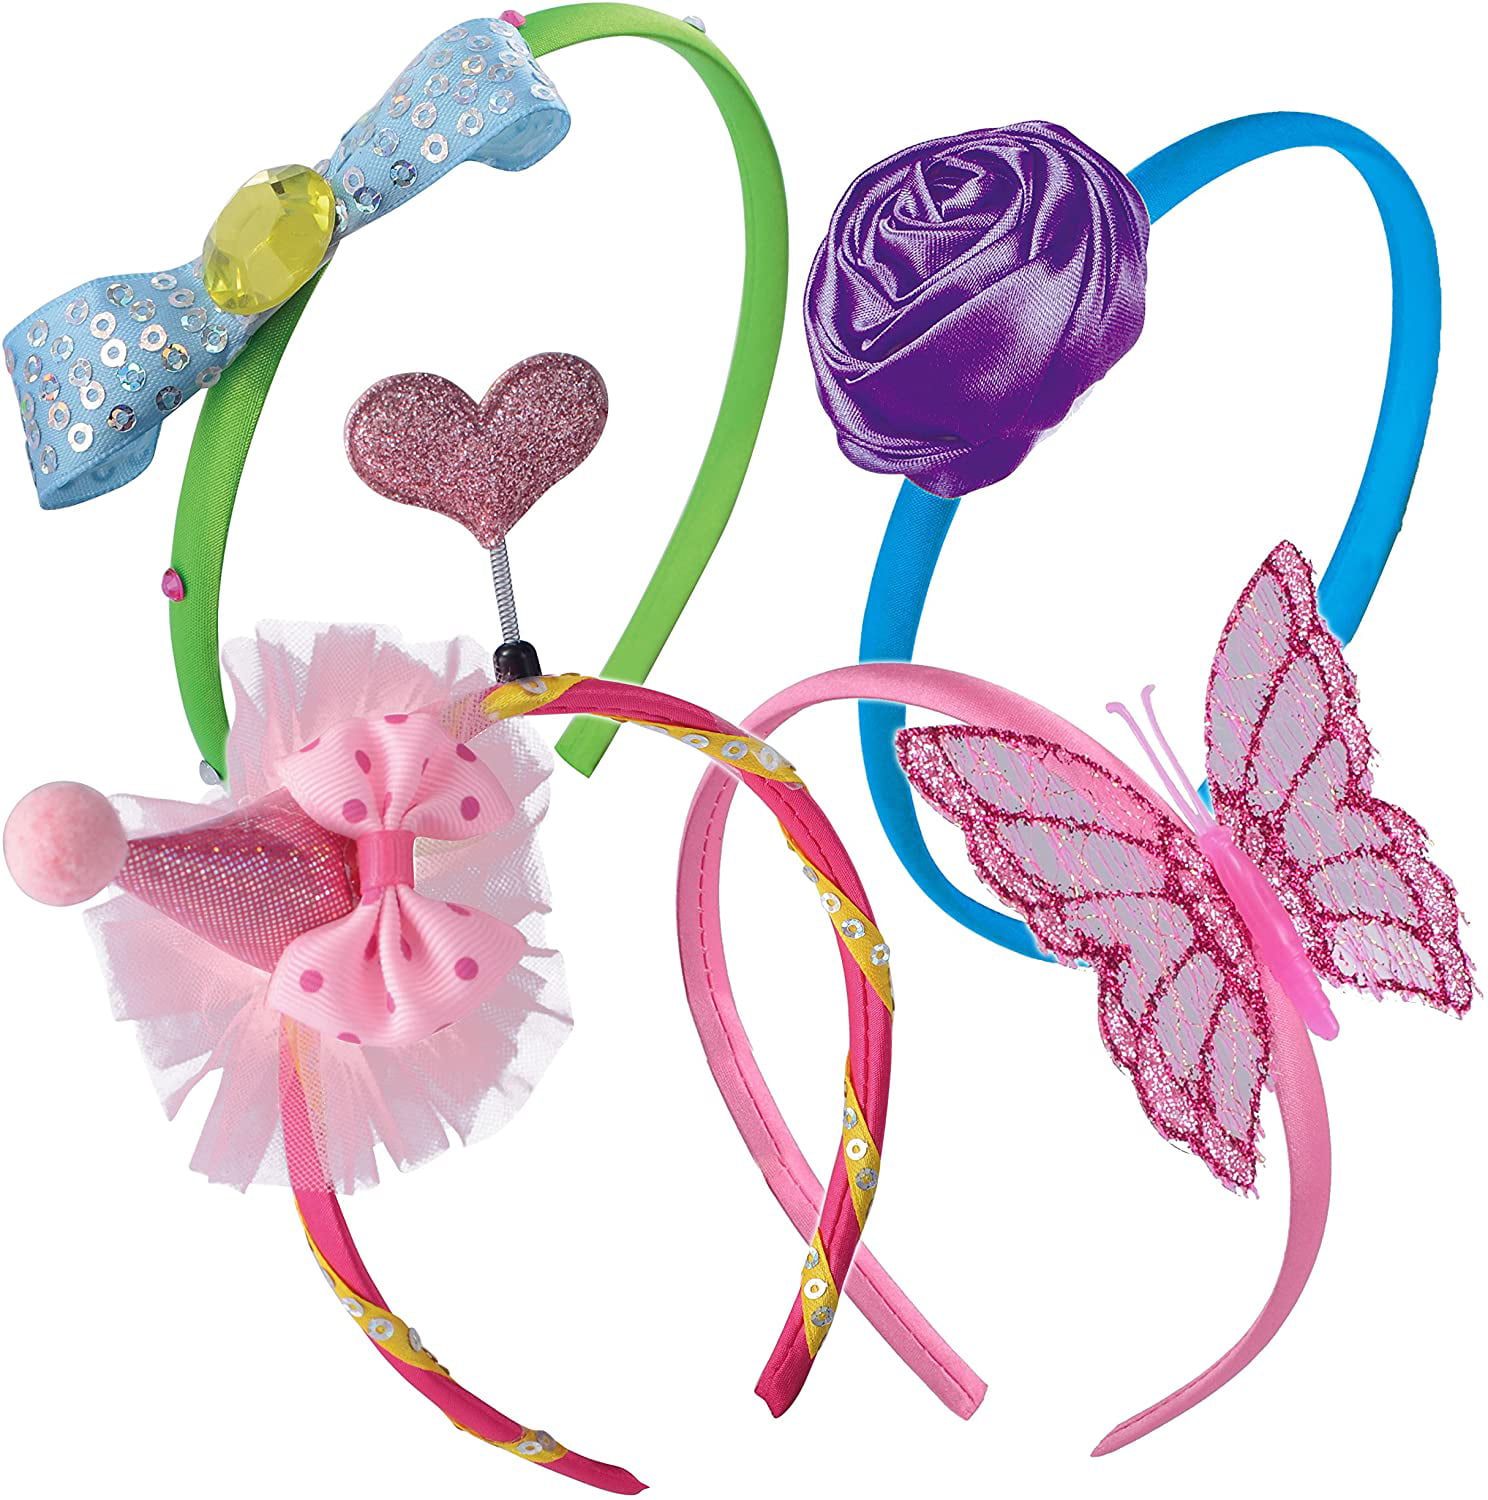 SYOKZEY Girls Hair Accessories, Headband Making Kit,Toys Gifts for 3-12  Years Old Girls,Girls Toys Age 3-12, Arts and Craft Kits, Birthday Presents